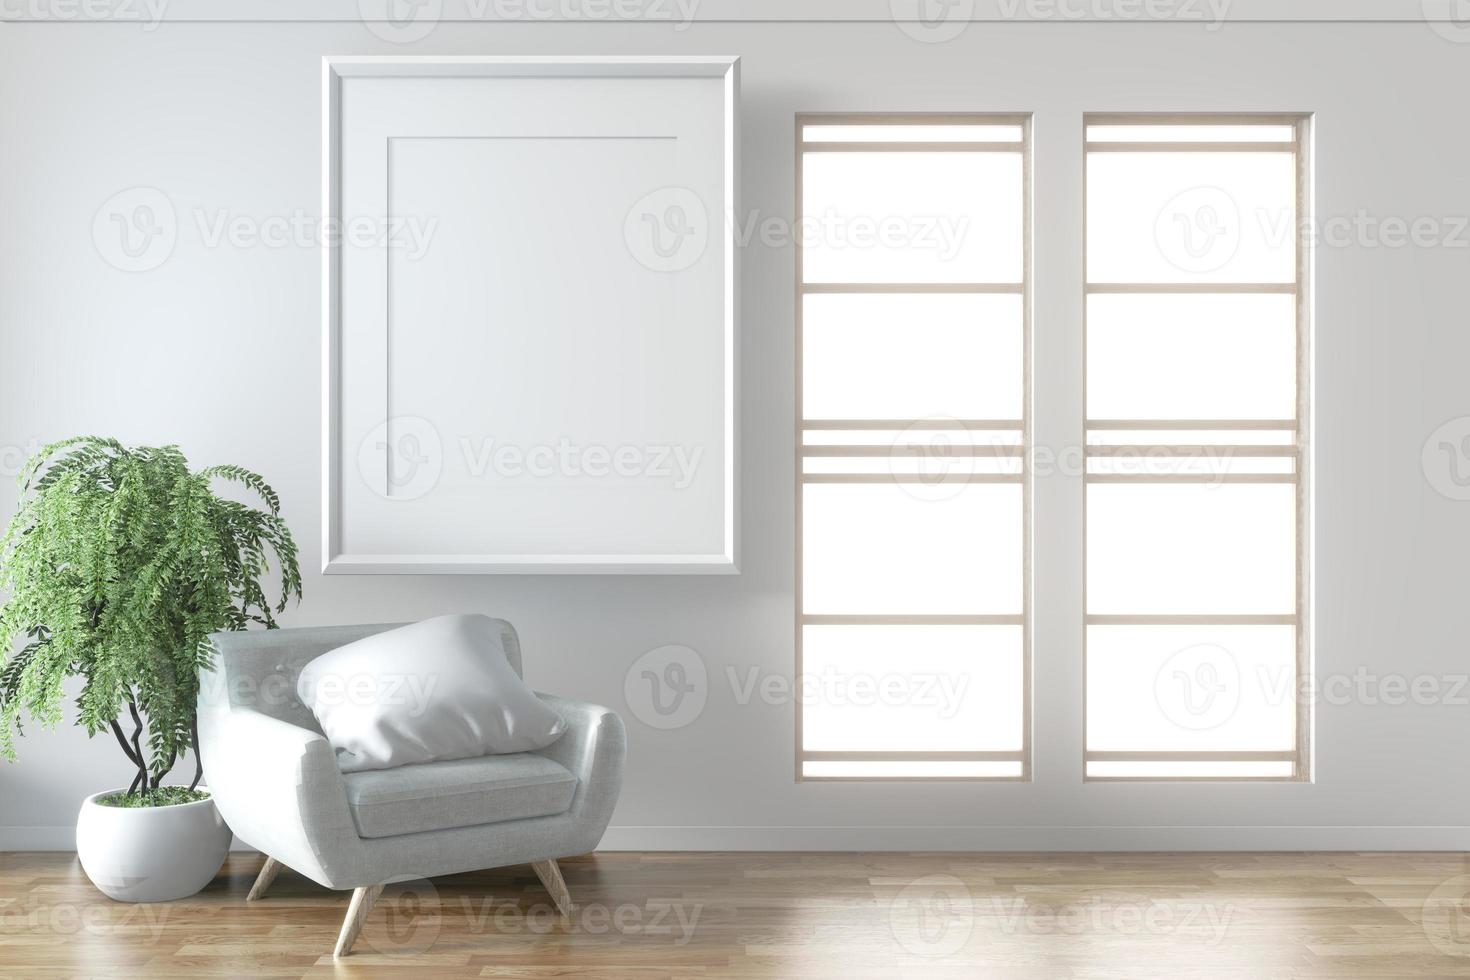 Elegant room interior mock up with grey stylish comfortable armchair and frame on white wall floor wooden.3d rendering photo